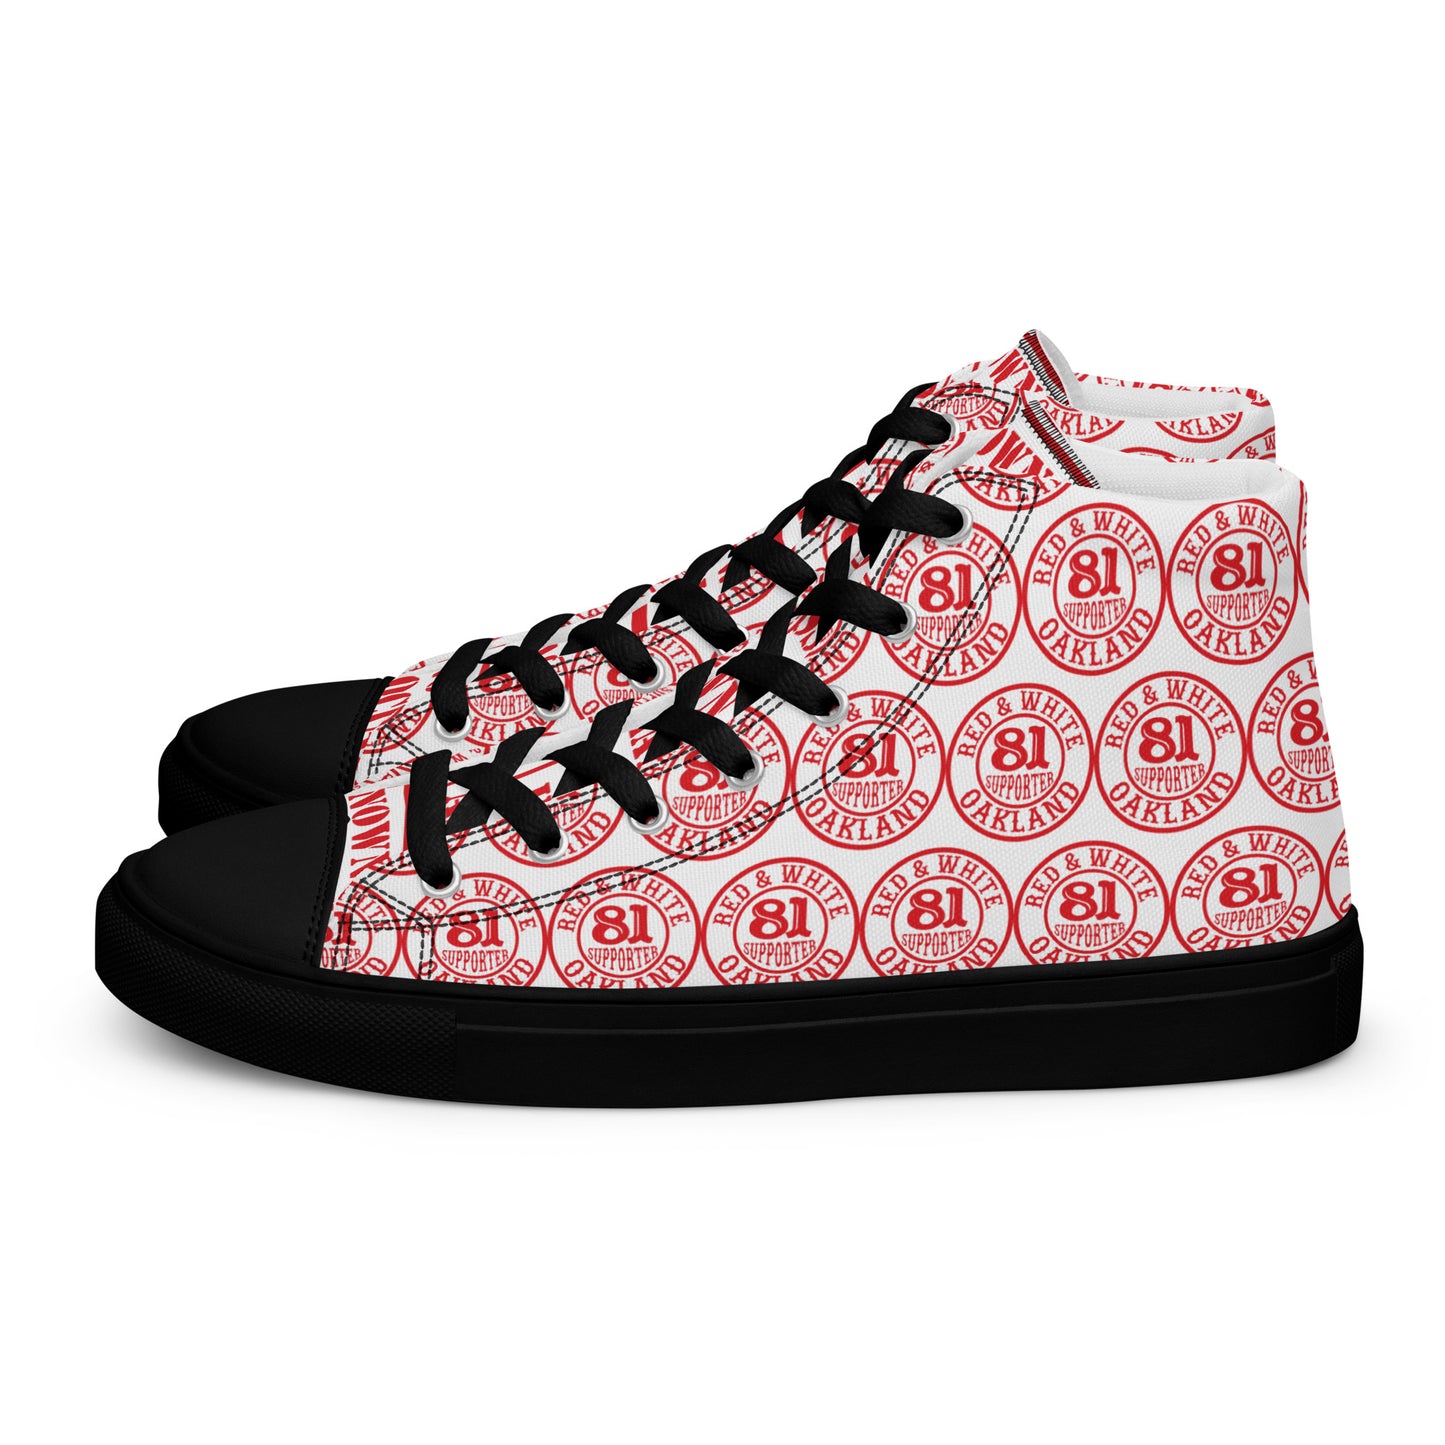 Support 81 Oakland- Men’s high top canvas shoes